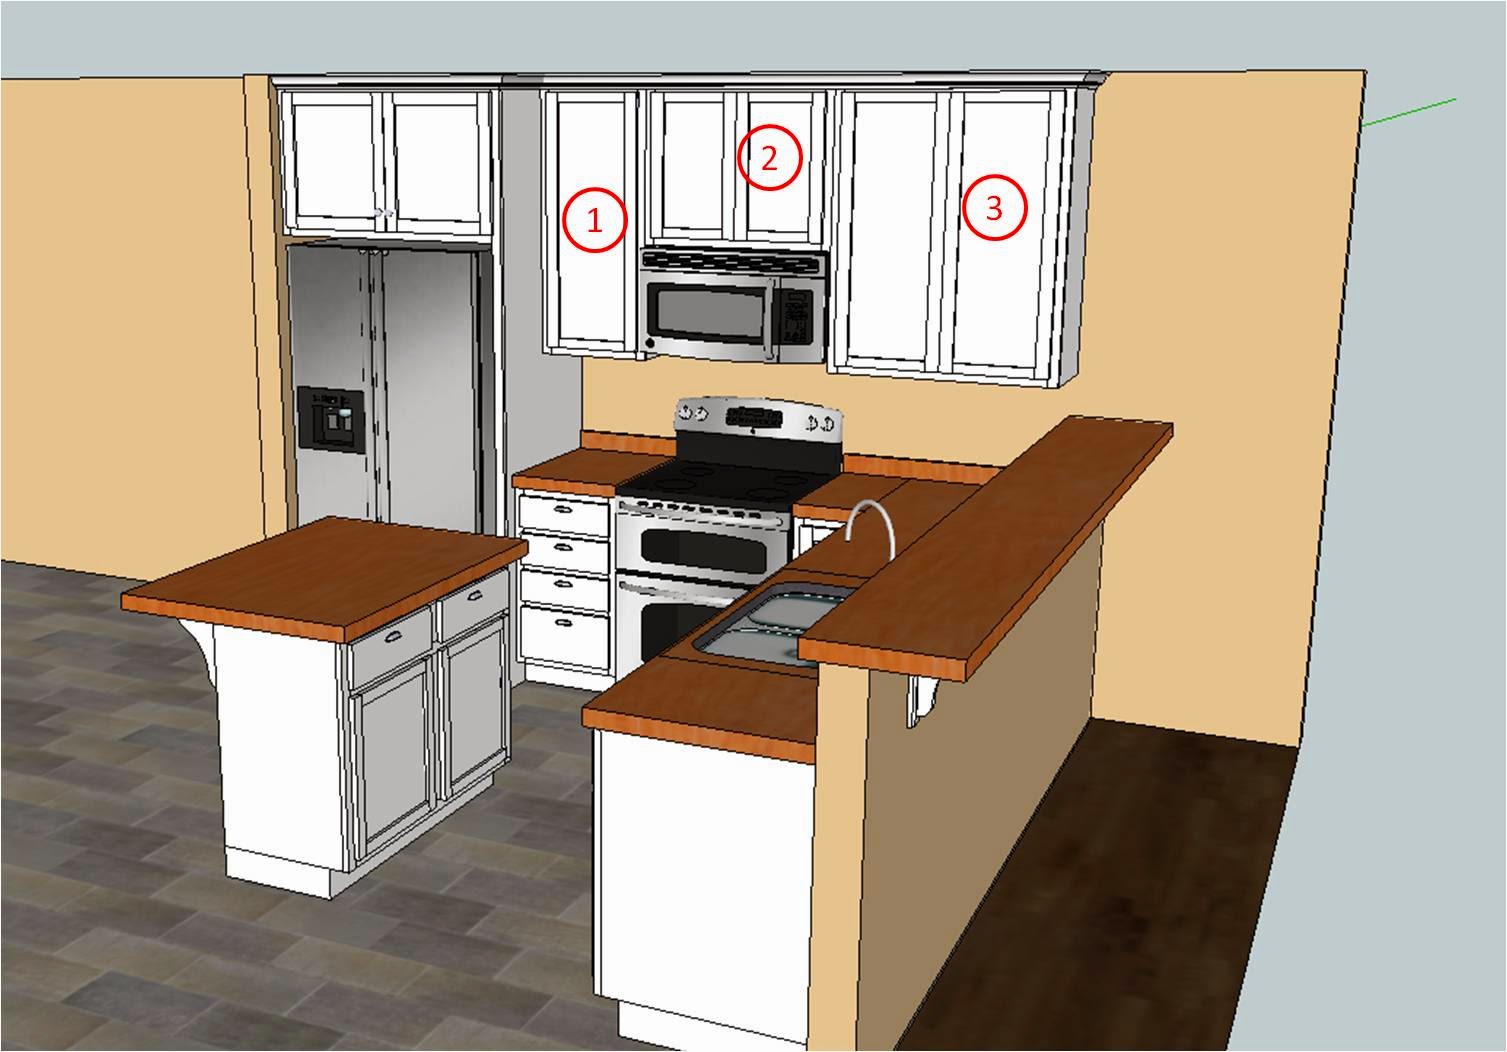 Somehow it all came together Time to draw up some kitchen